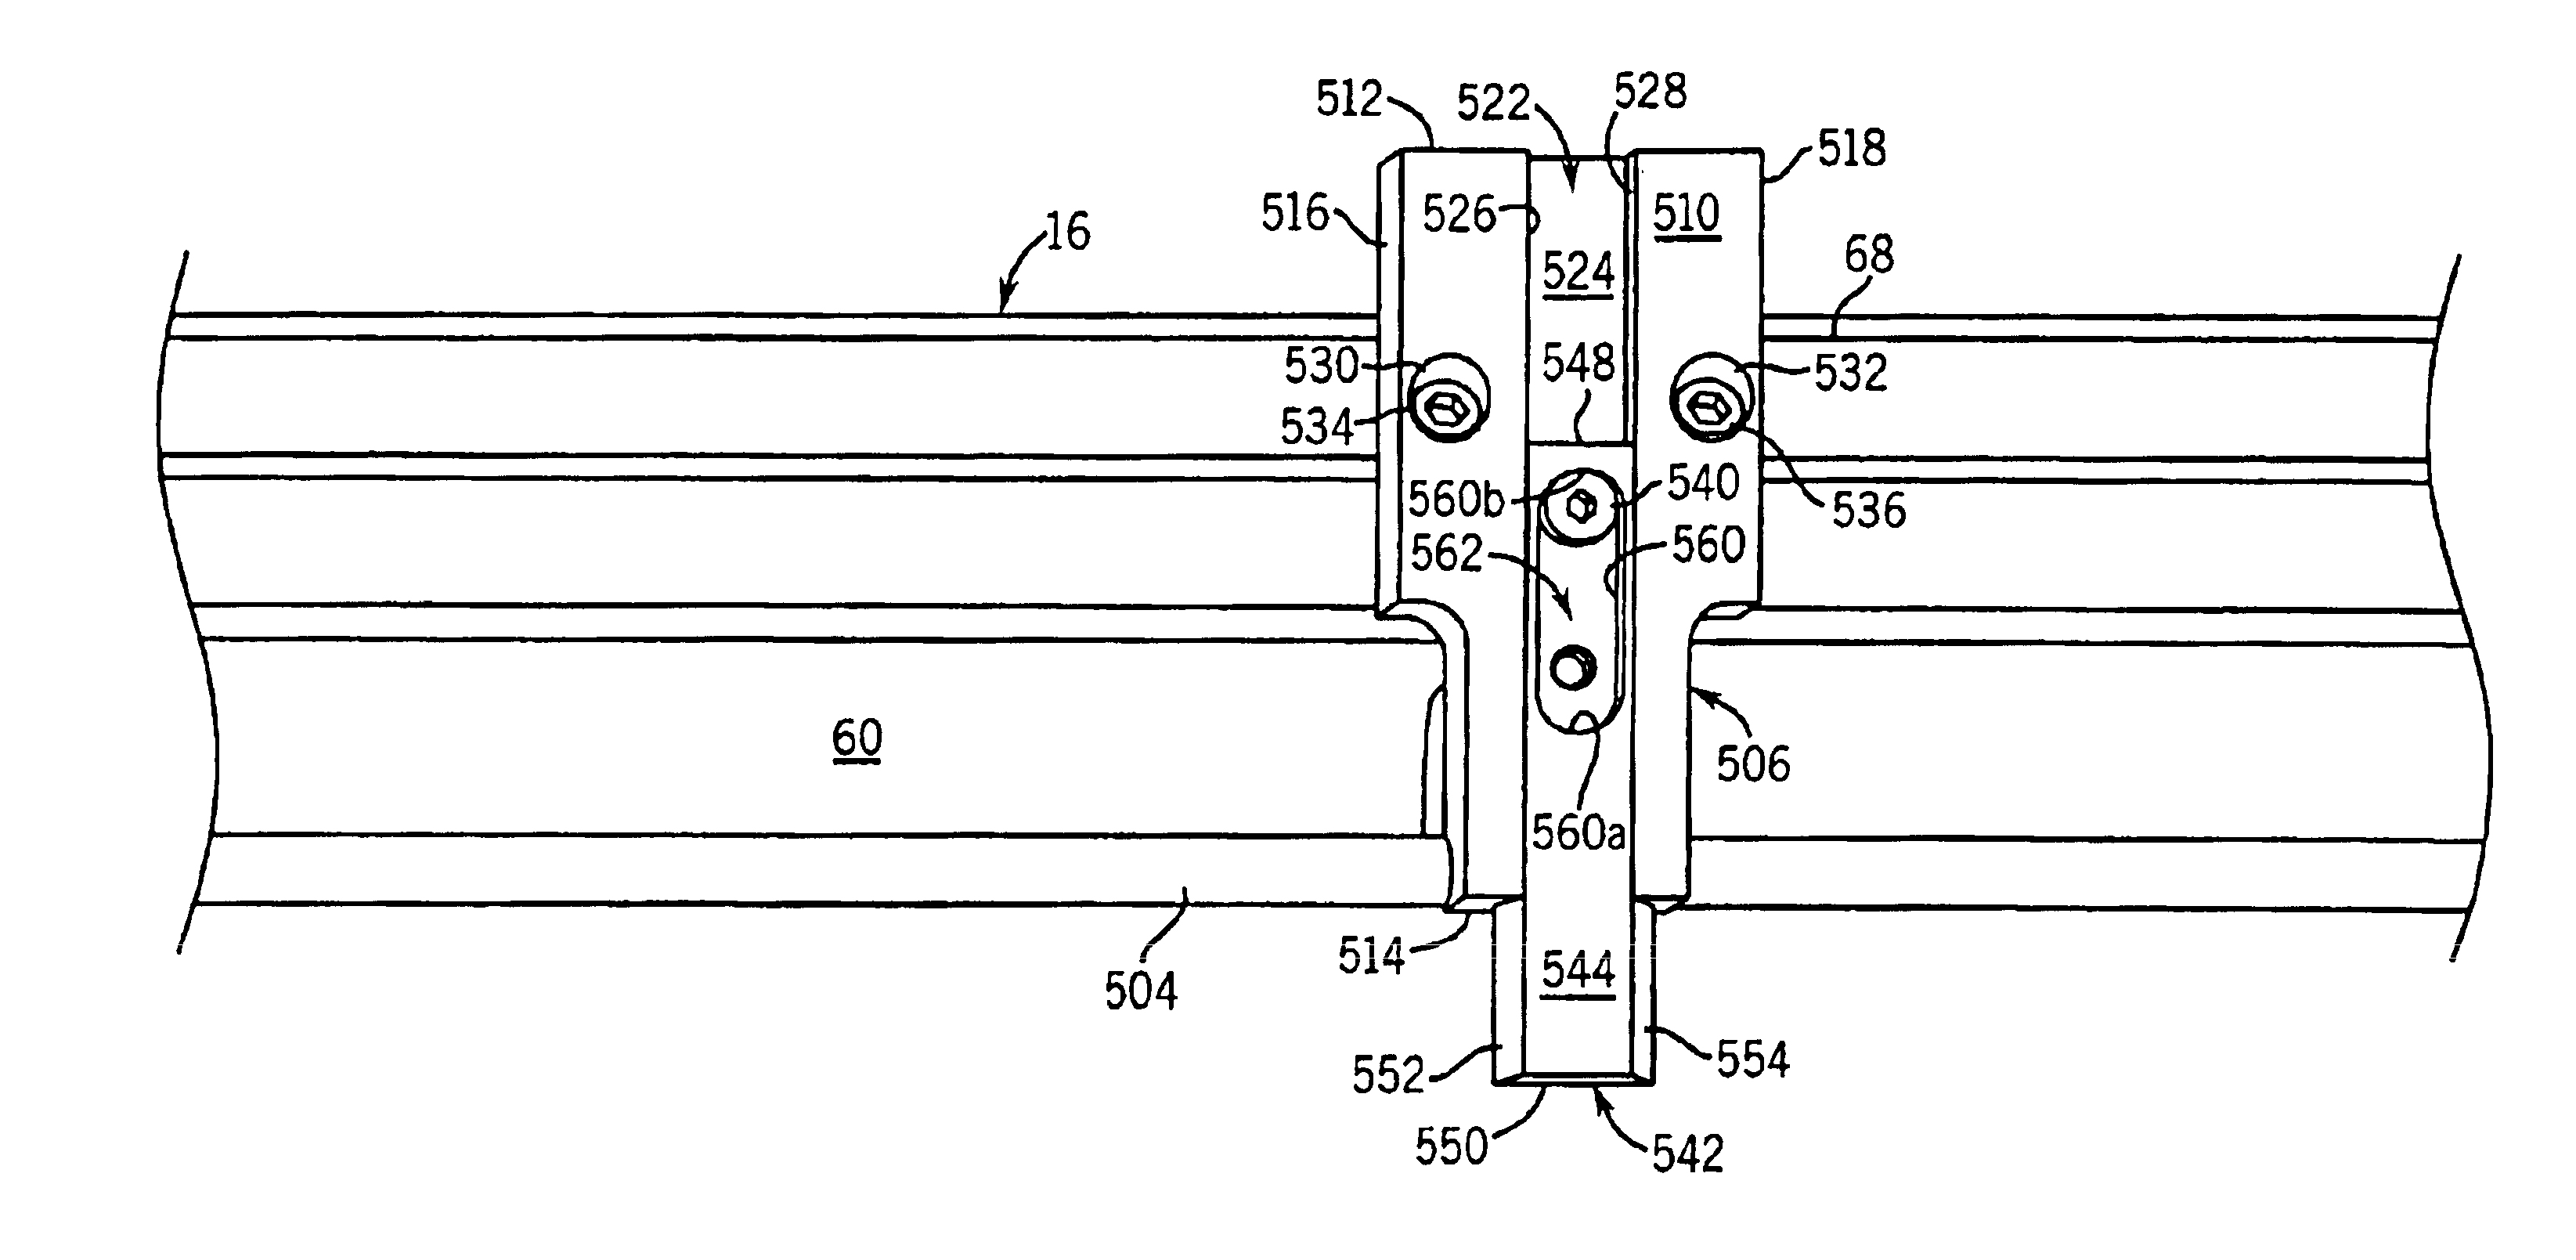 Stiffening assembly for stiffening the lower frame assembly of a blanking tool